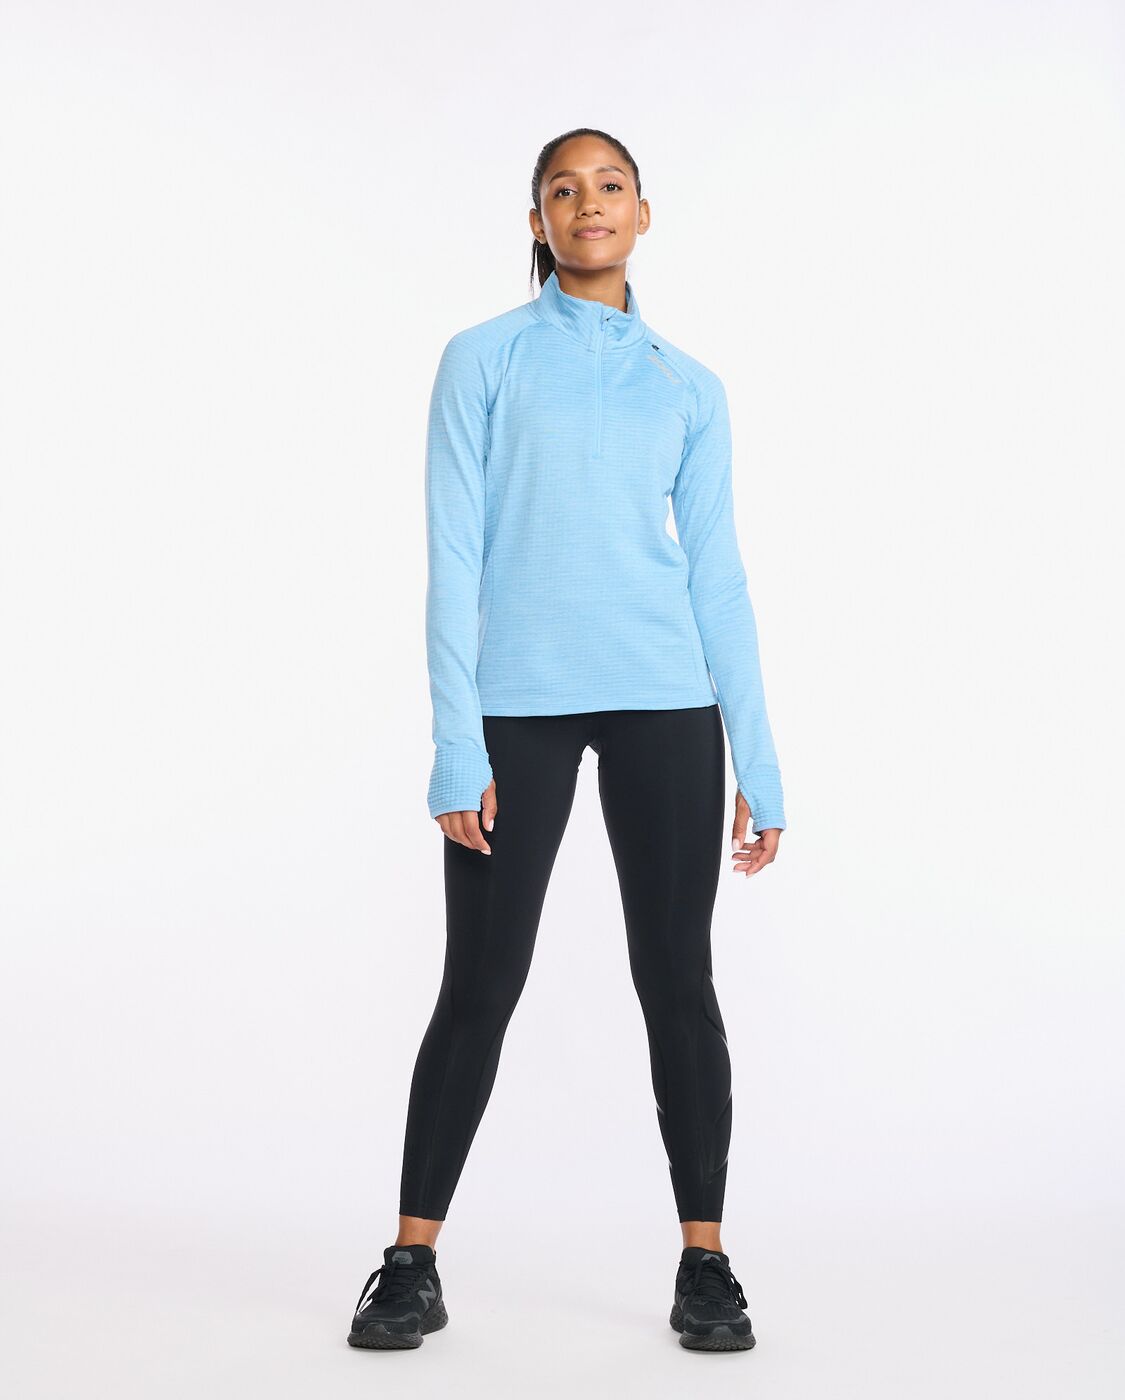 2XU South Africa - Women's Ignition Long Sleeve 1/4 Zip - Mirage/Silver Reflective